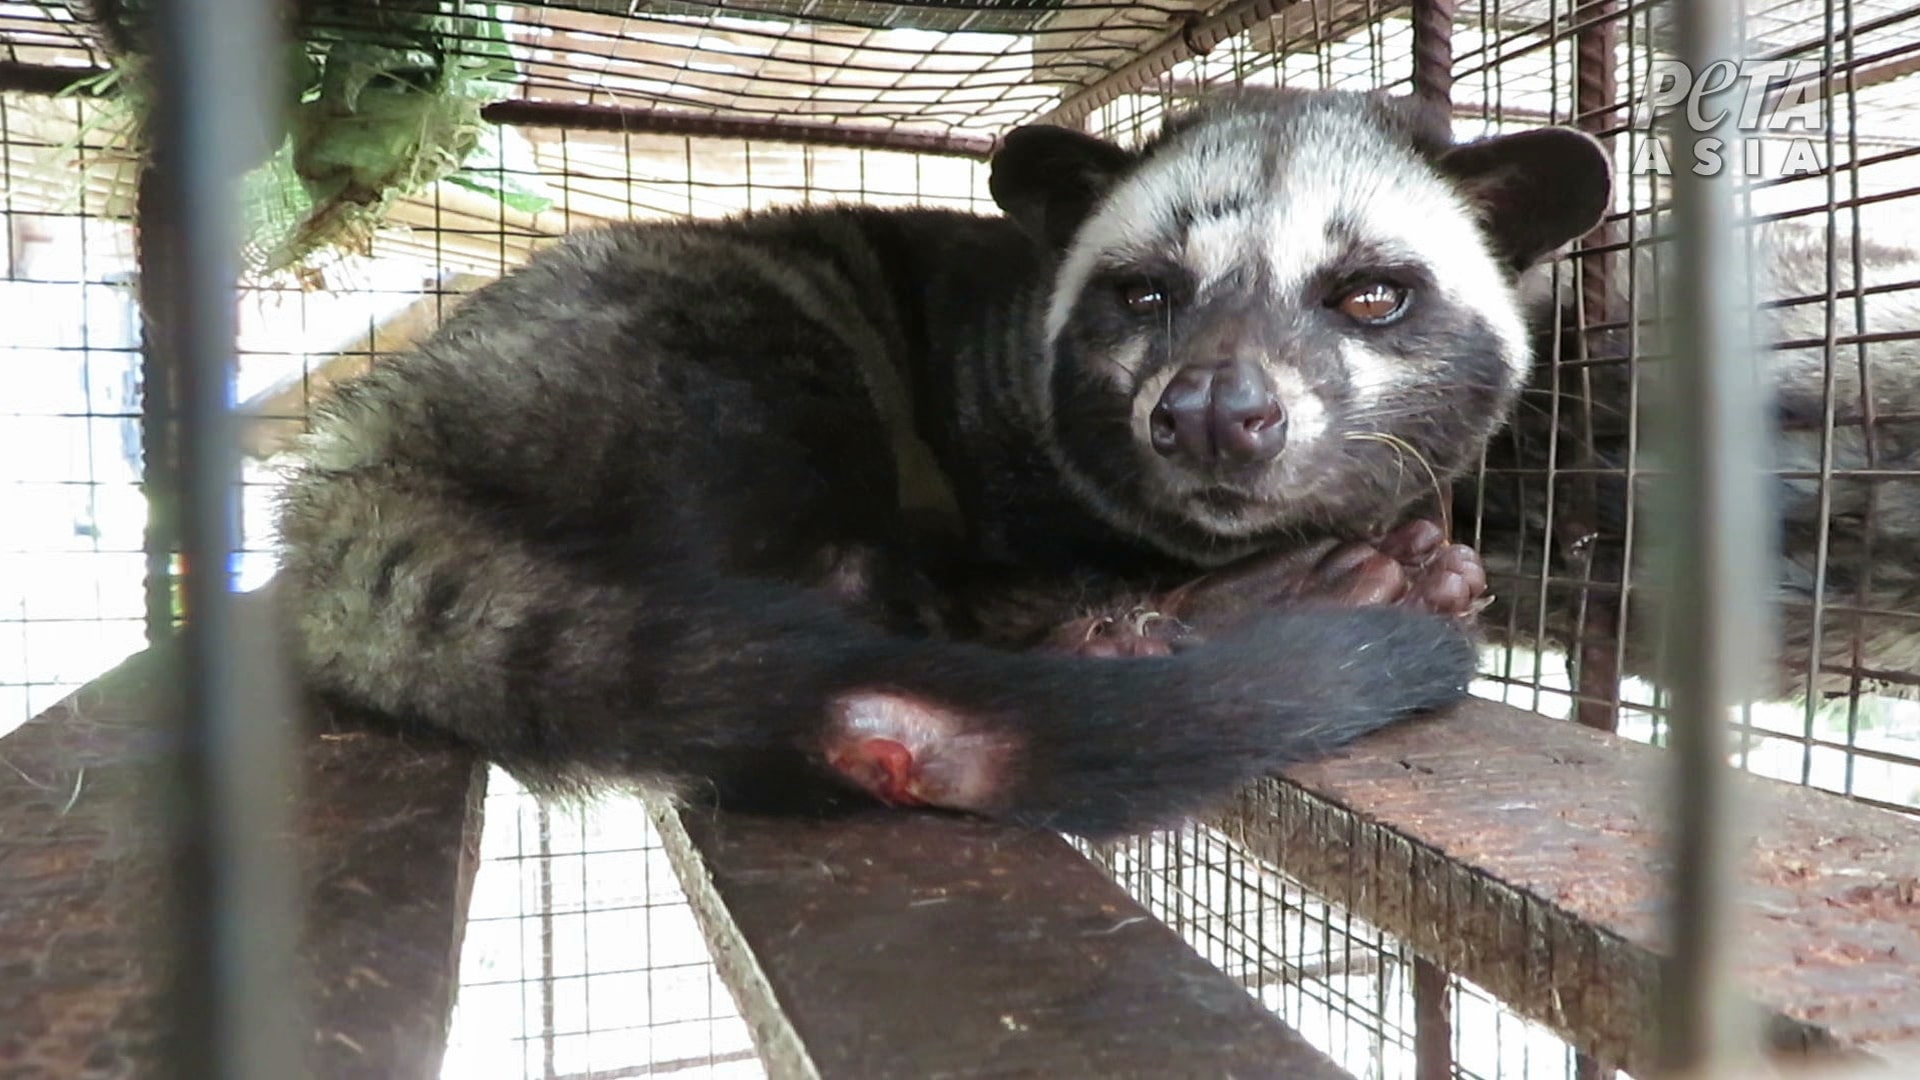 Kopi luwak coffee beans are excreted by imprisoned, unhealthy civets who are denied everything that is natural and important to them.